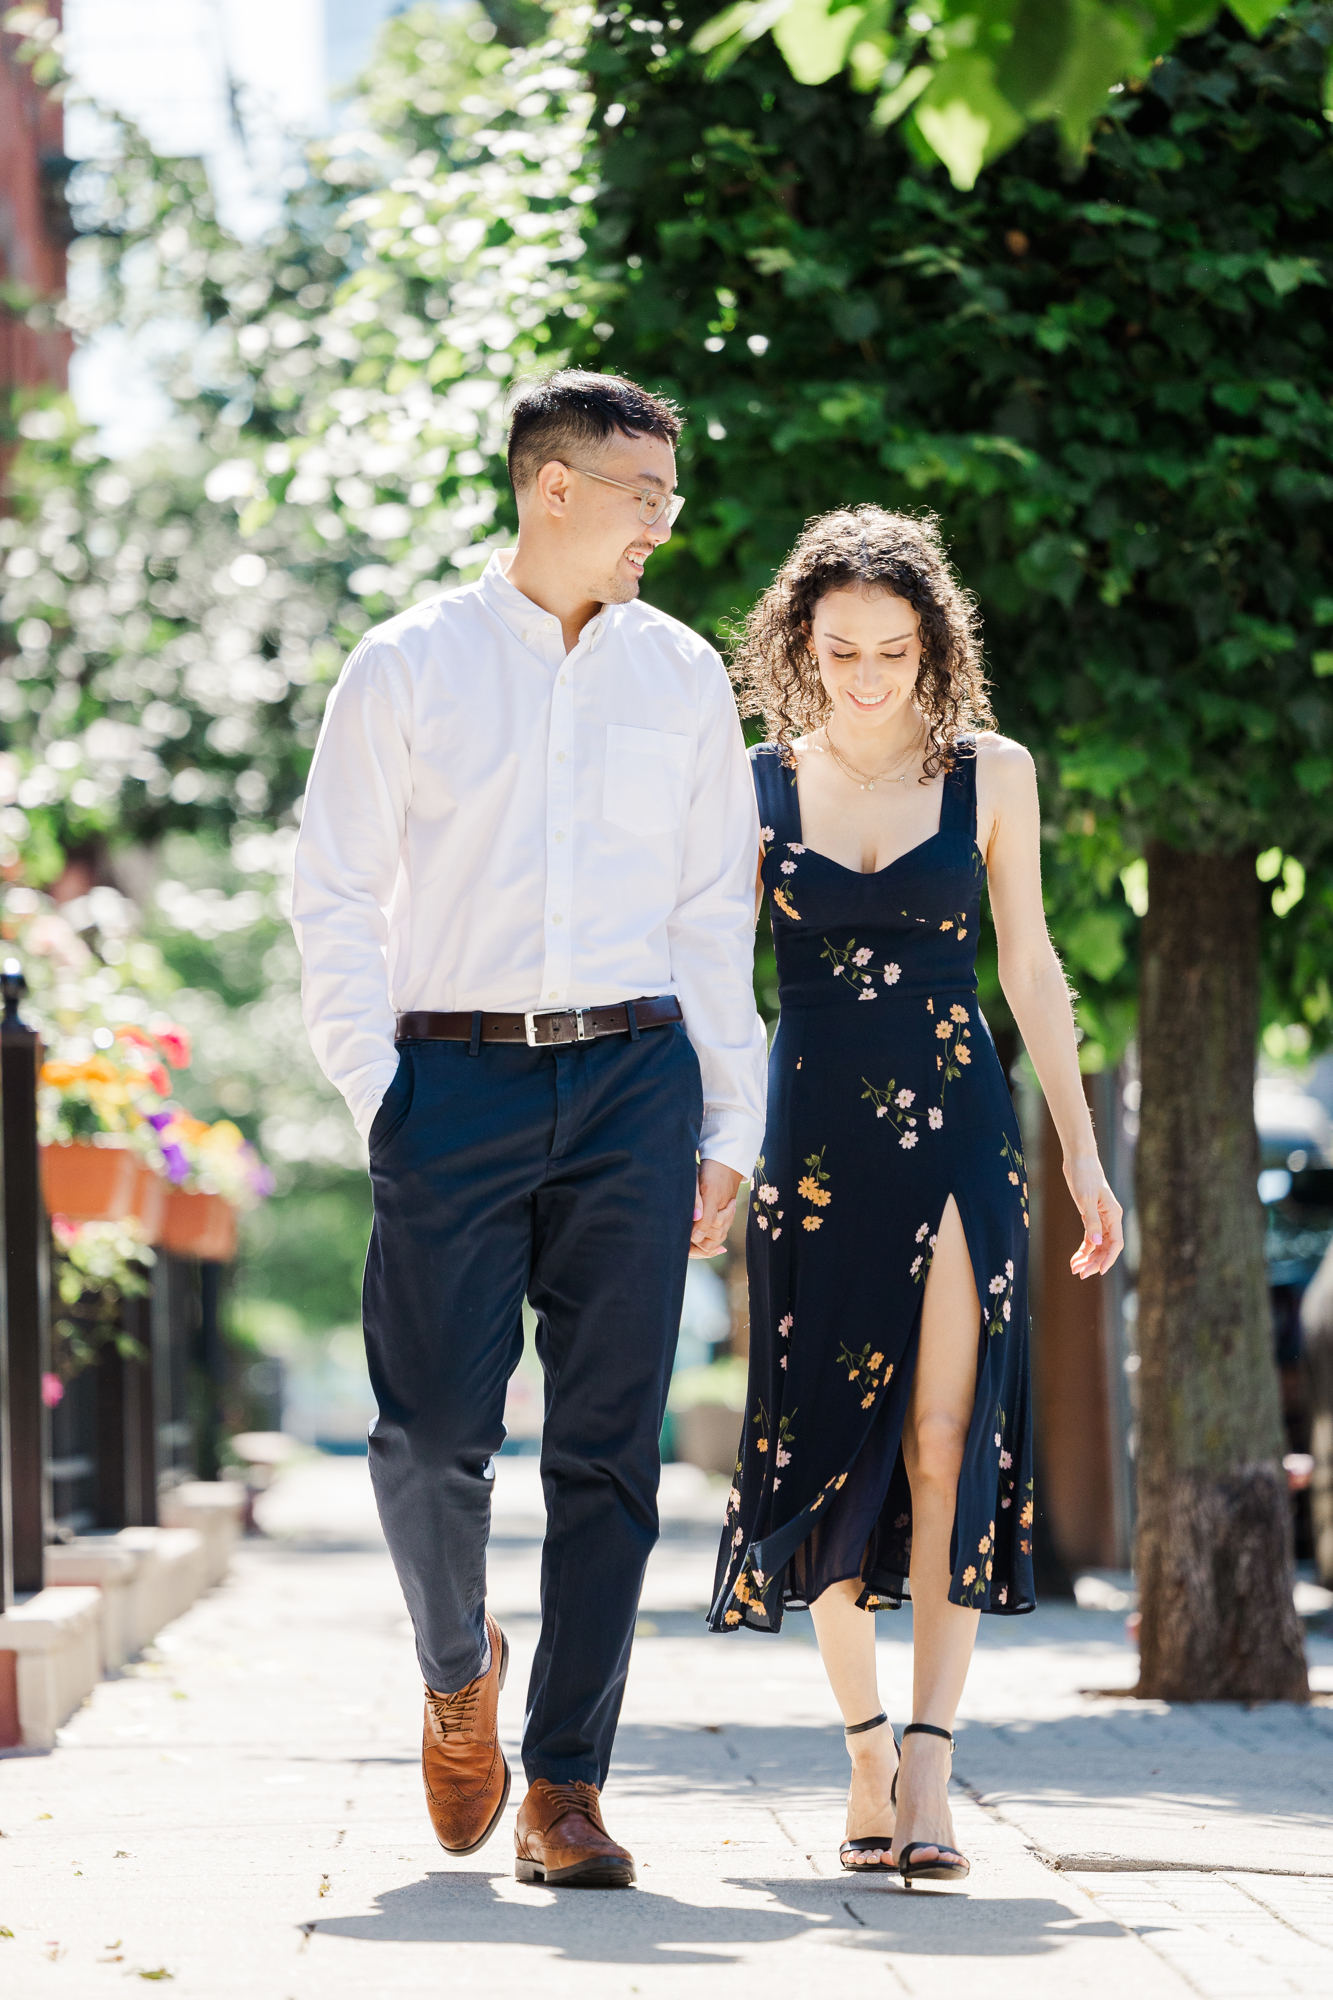 Breath - Taking Skyline Engagement Photos in Jersey City